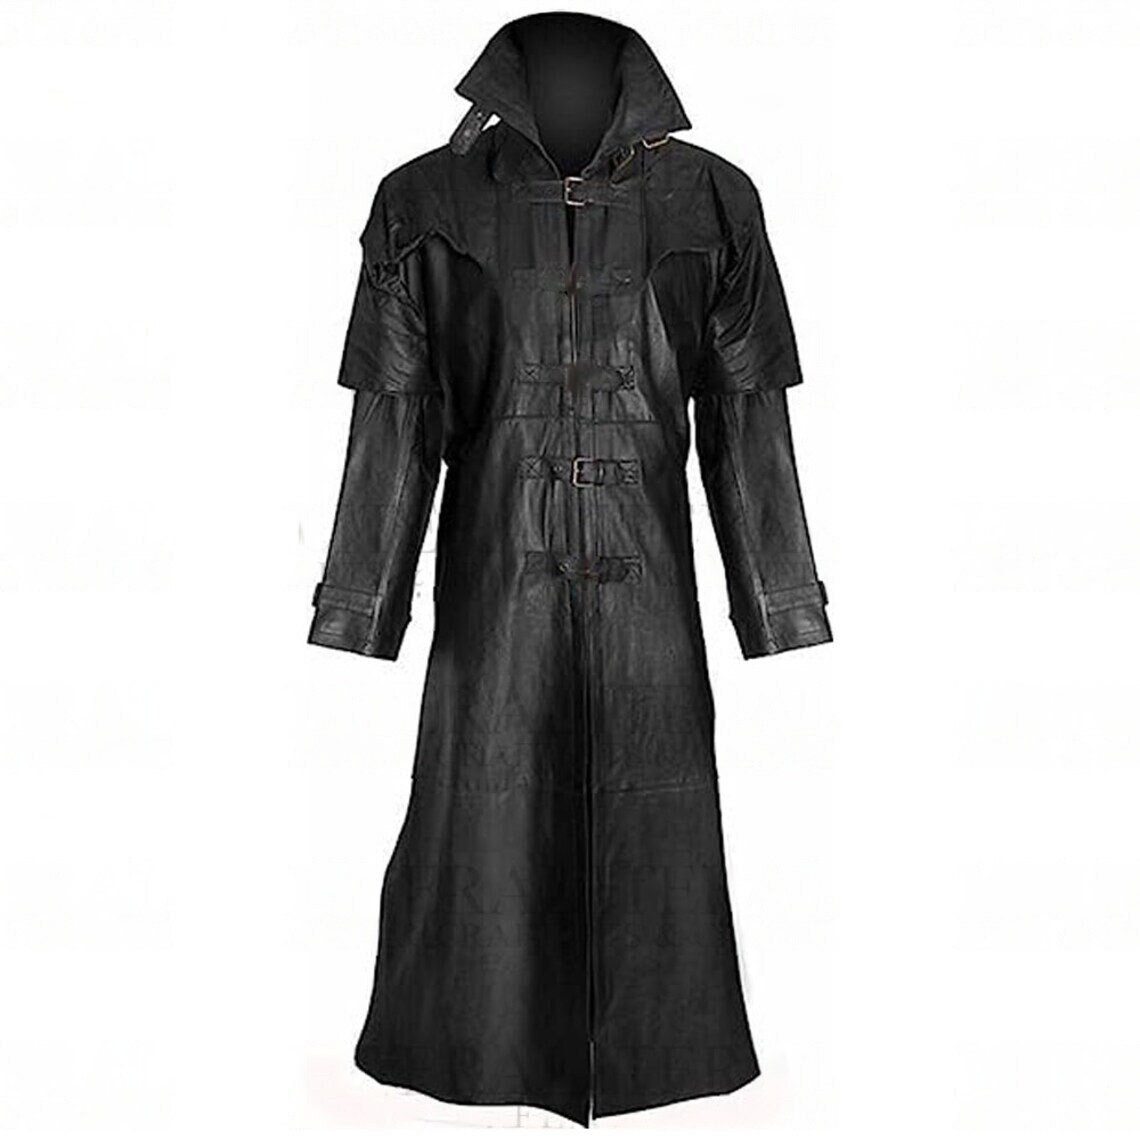 Hugh Jackman Helsing Trench Coat Steampunk Gothic Leather Coat Duster ...